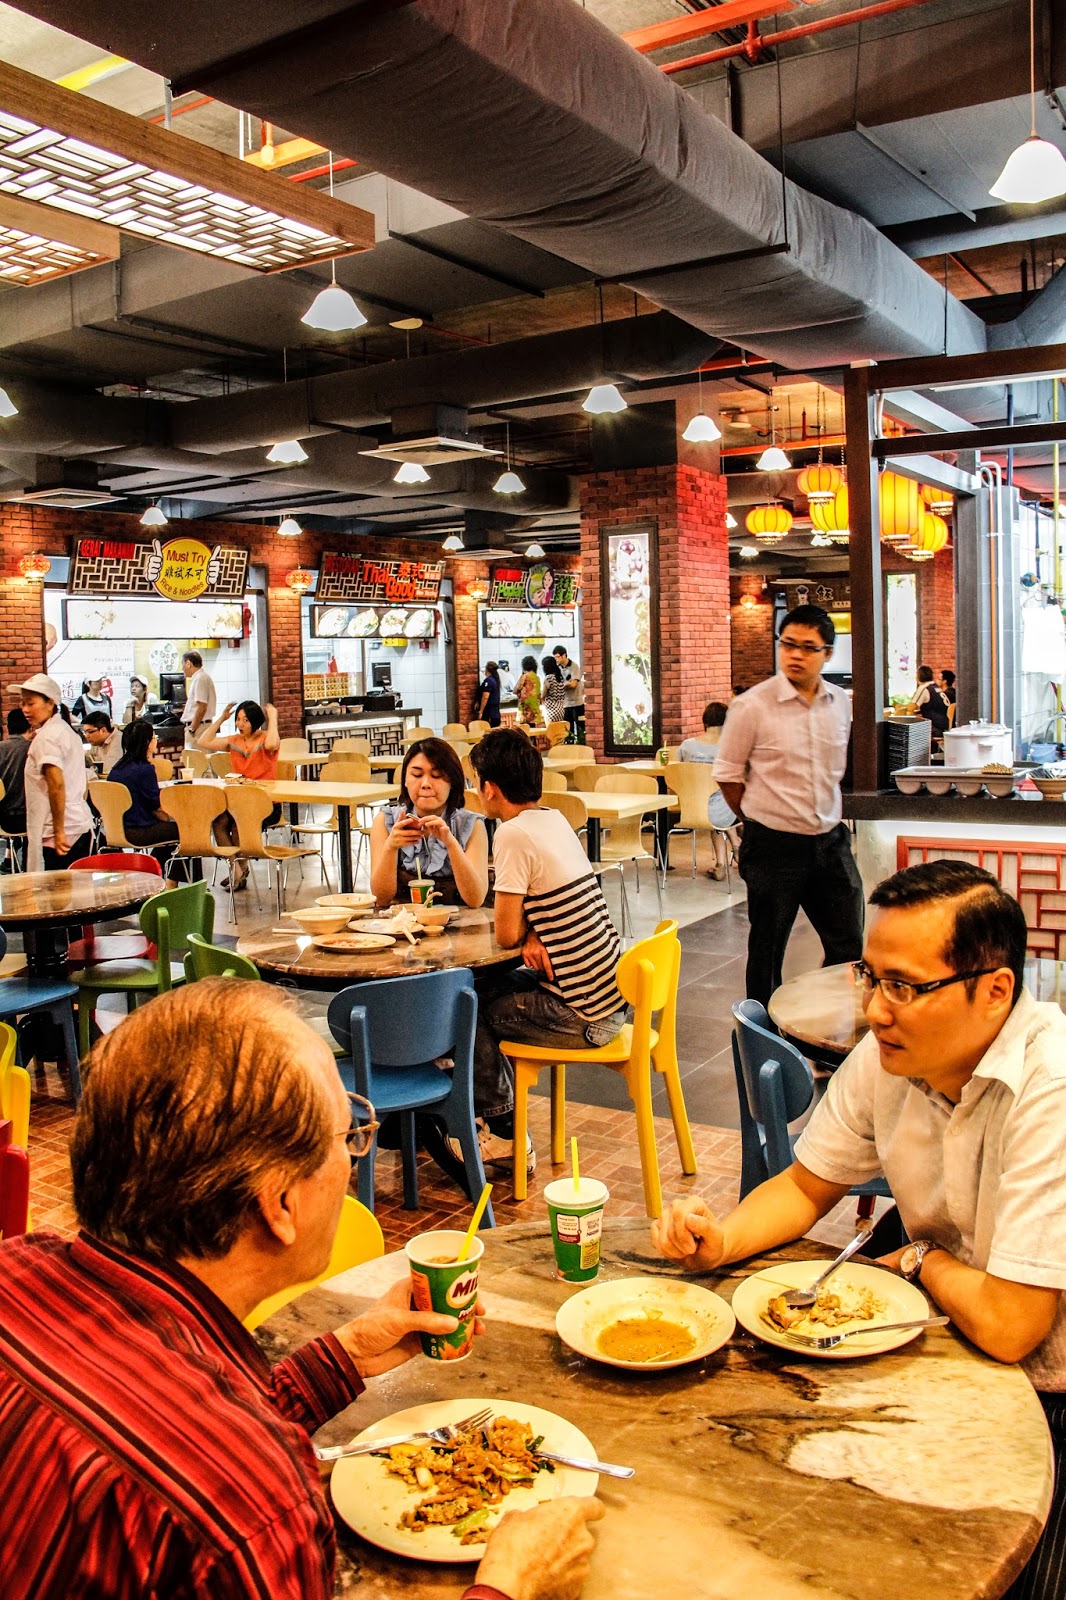 Gp Food Court Ipoh / Simply select search for restaurants near me and